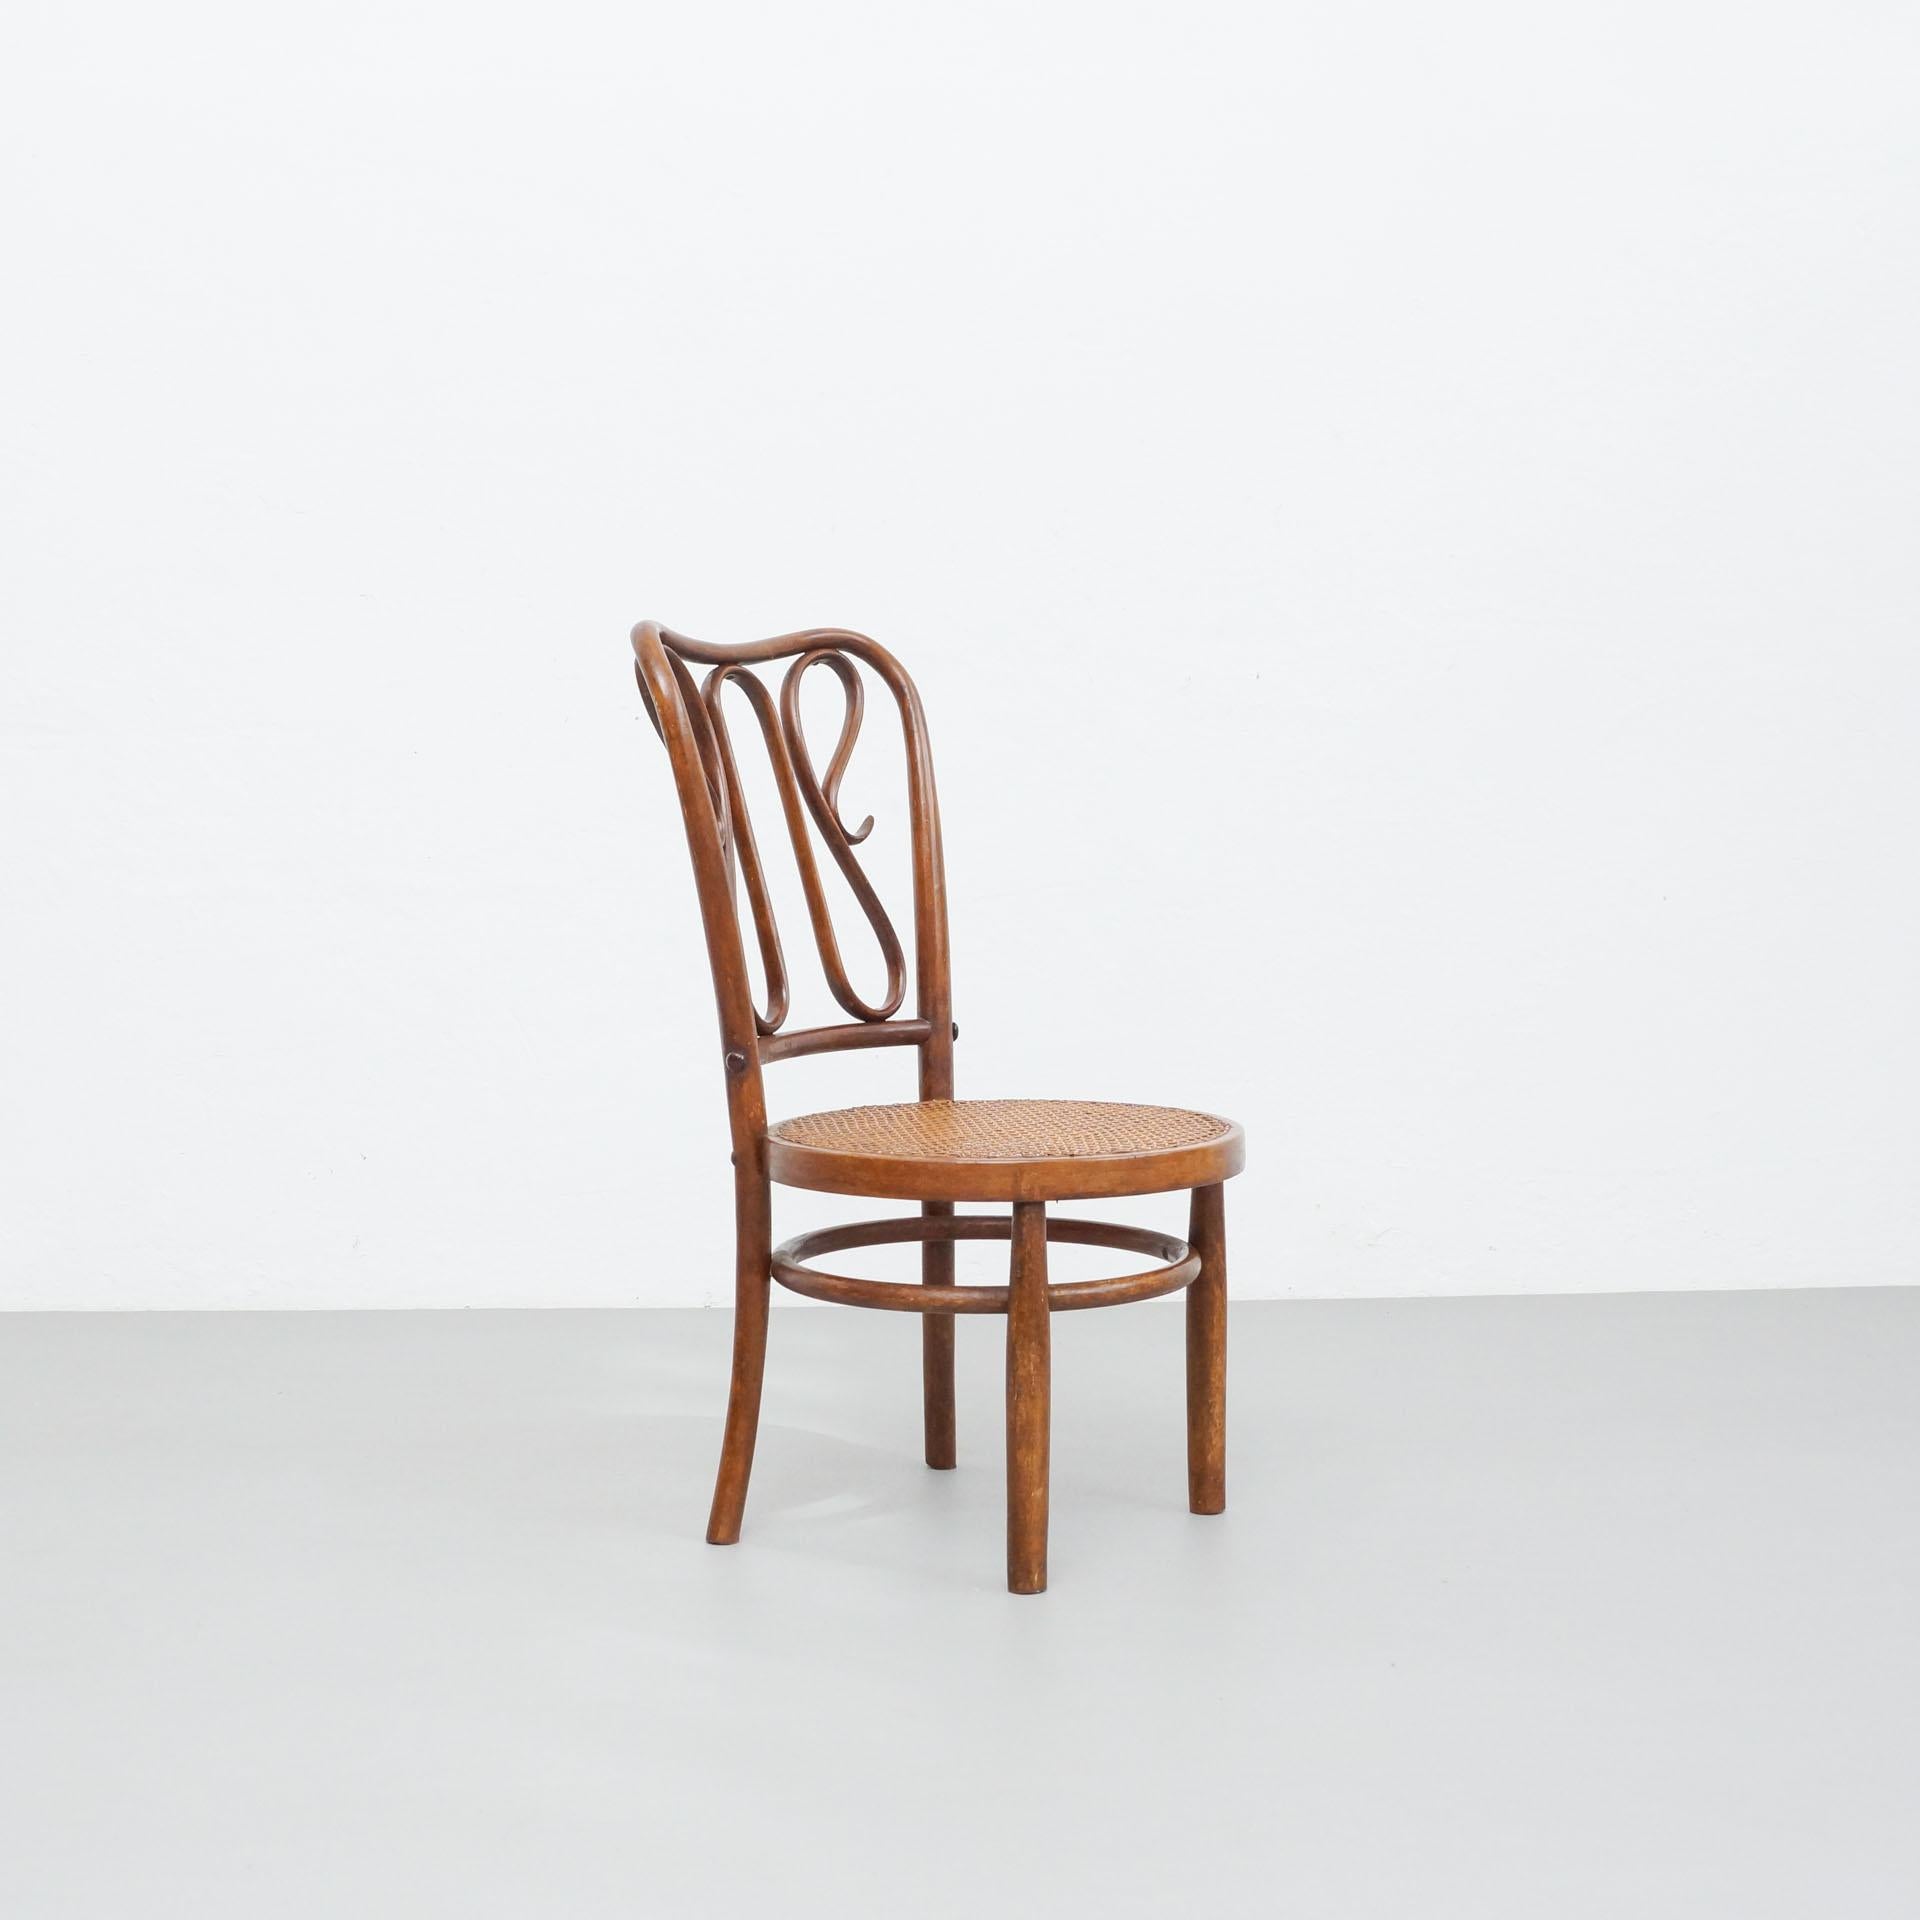 Mid-20th Century Bentwood Chair in the Style of Thonet, Rattan and Wood, circa 1940 For Sale